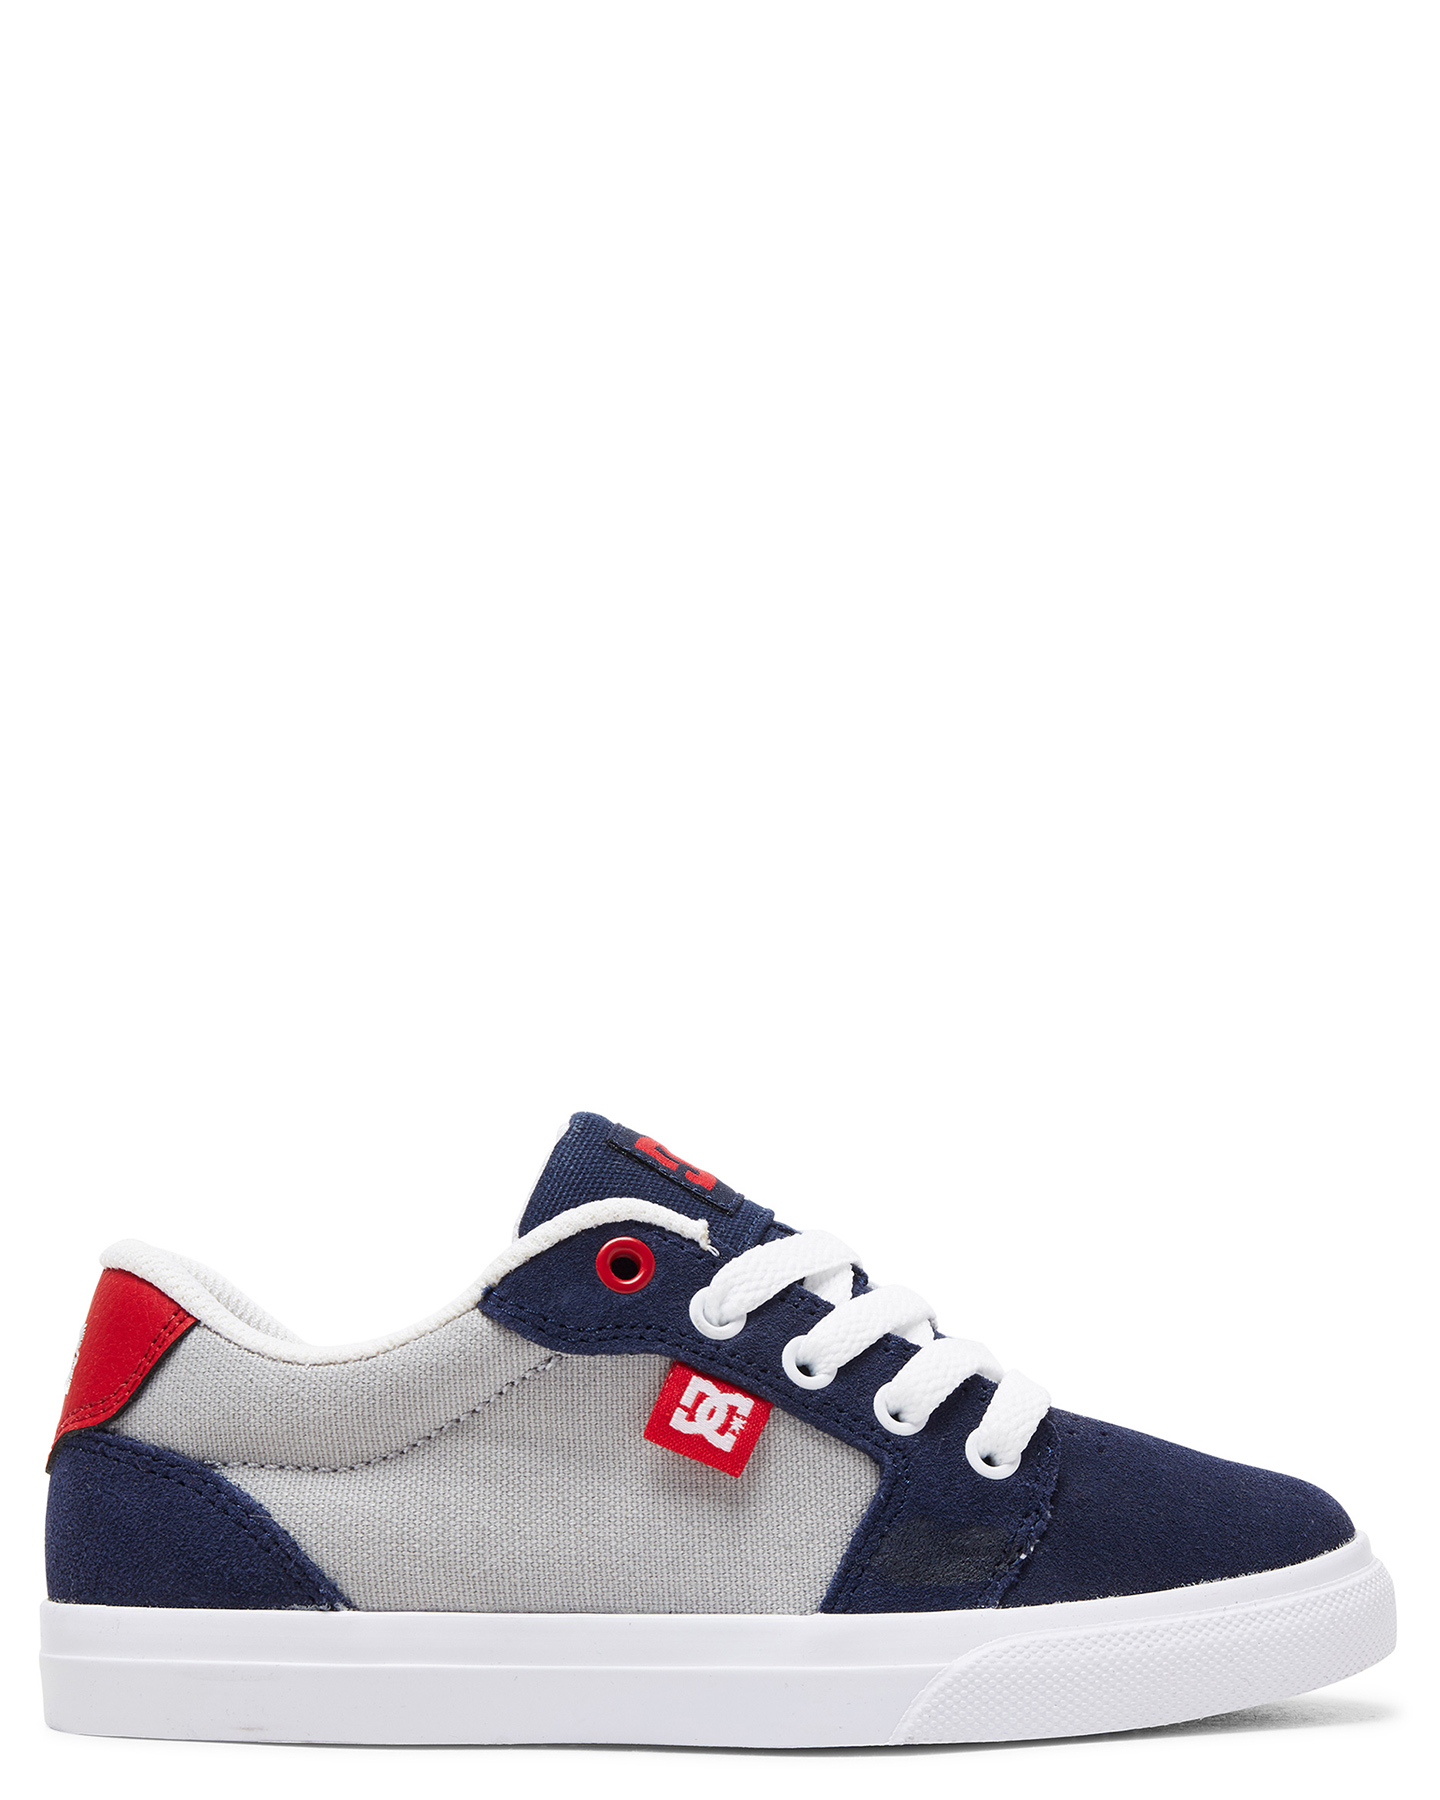 Dc Shoes Boys Anvil Shoe - Grey/Red 